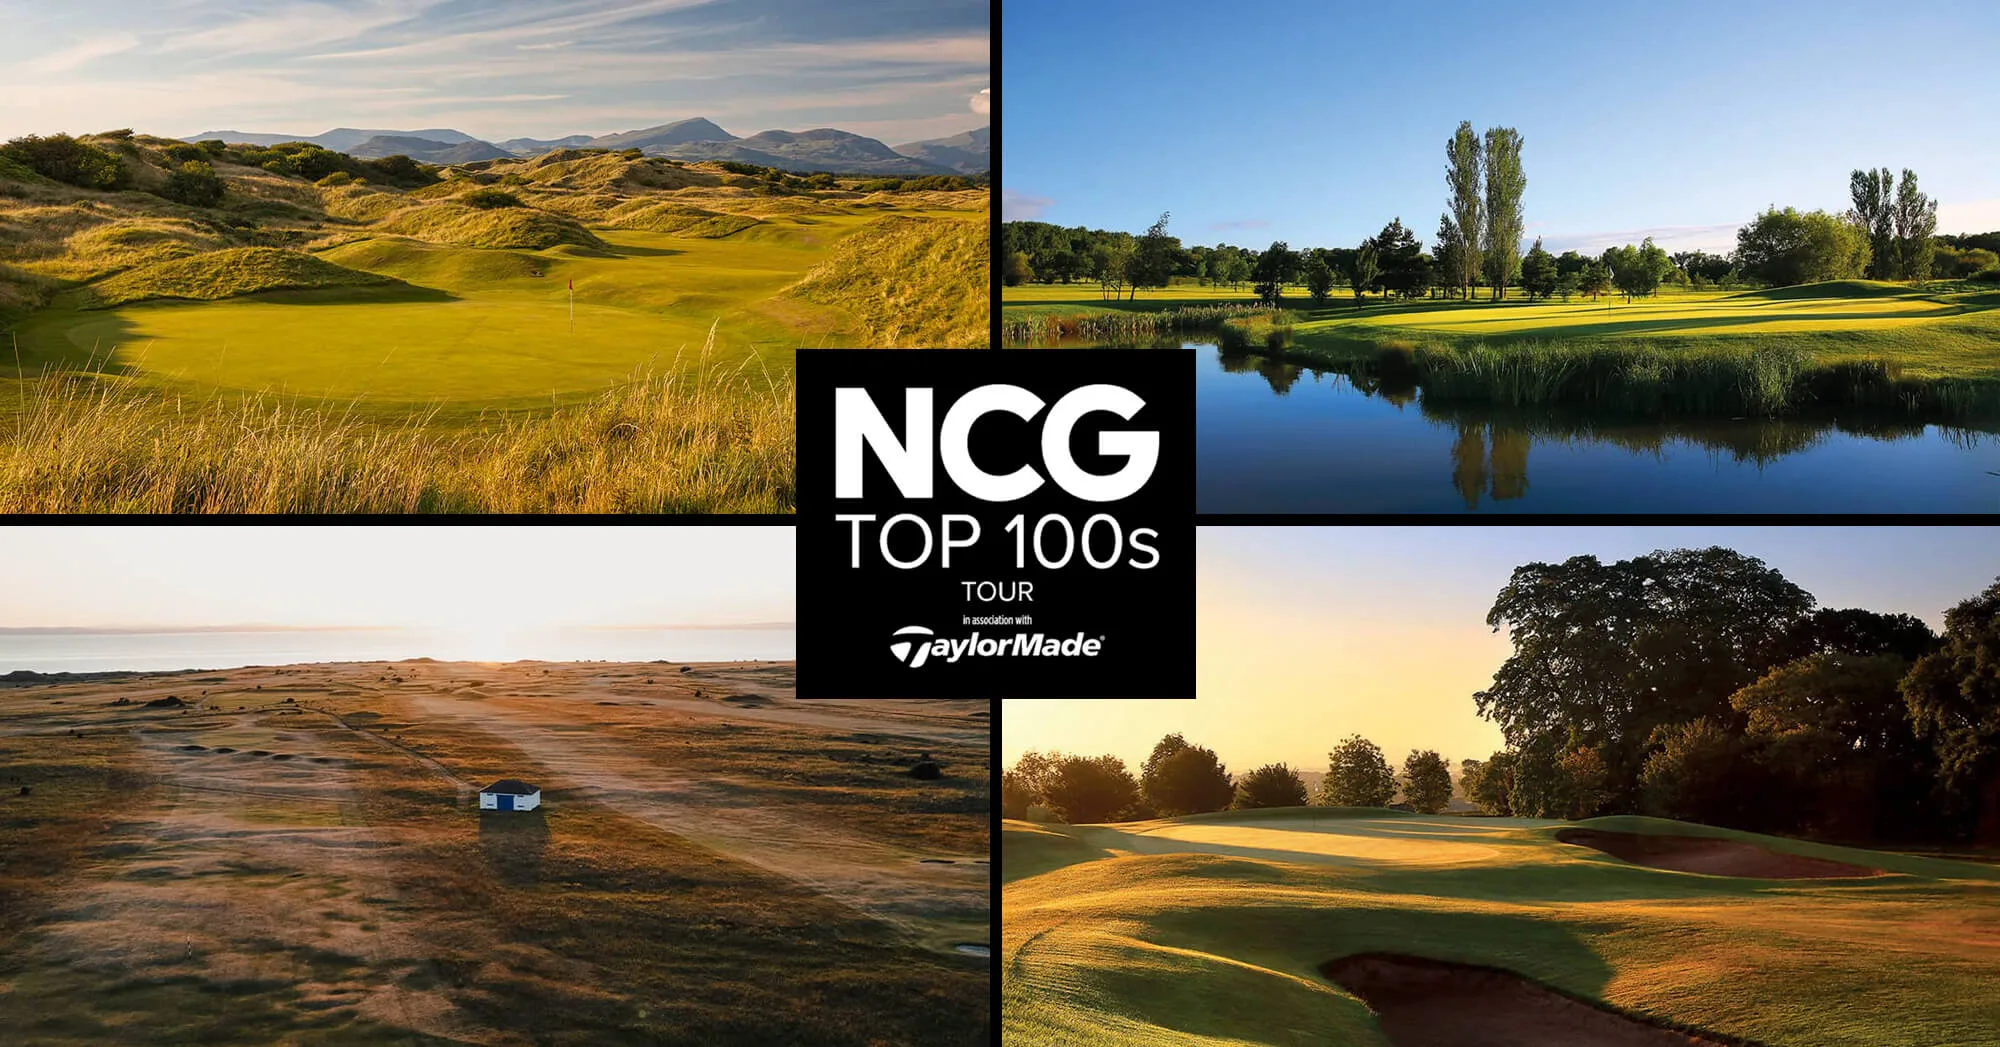 WIN! A free fourball at one of 15 NCG Top 100s Tour venues